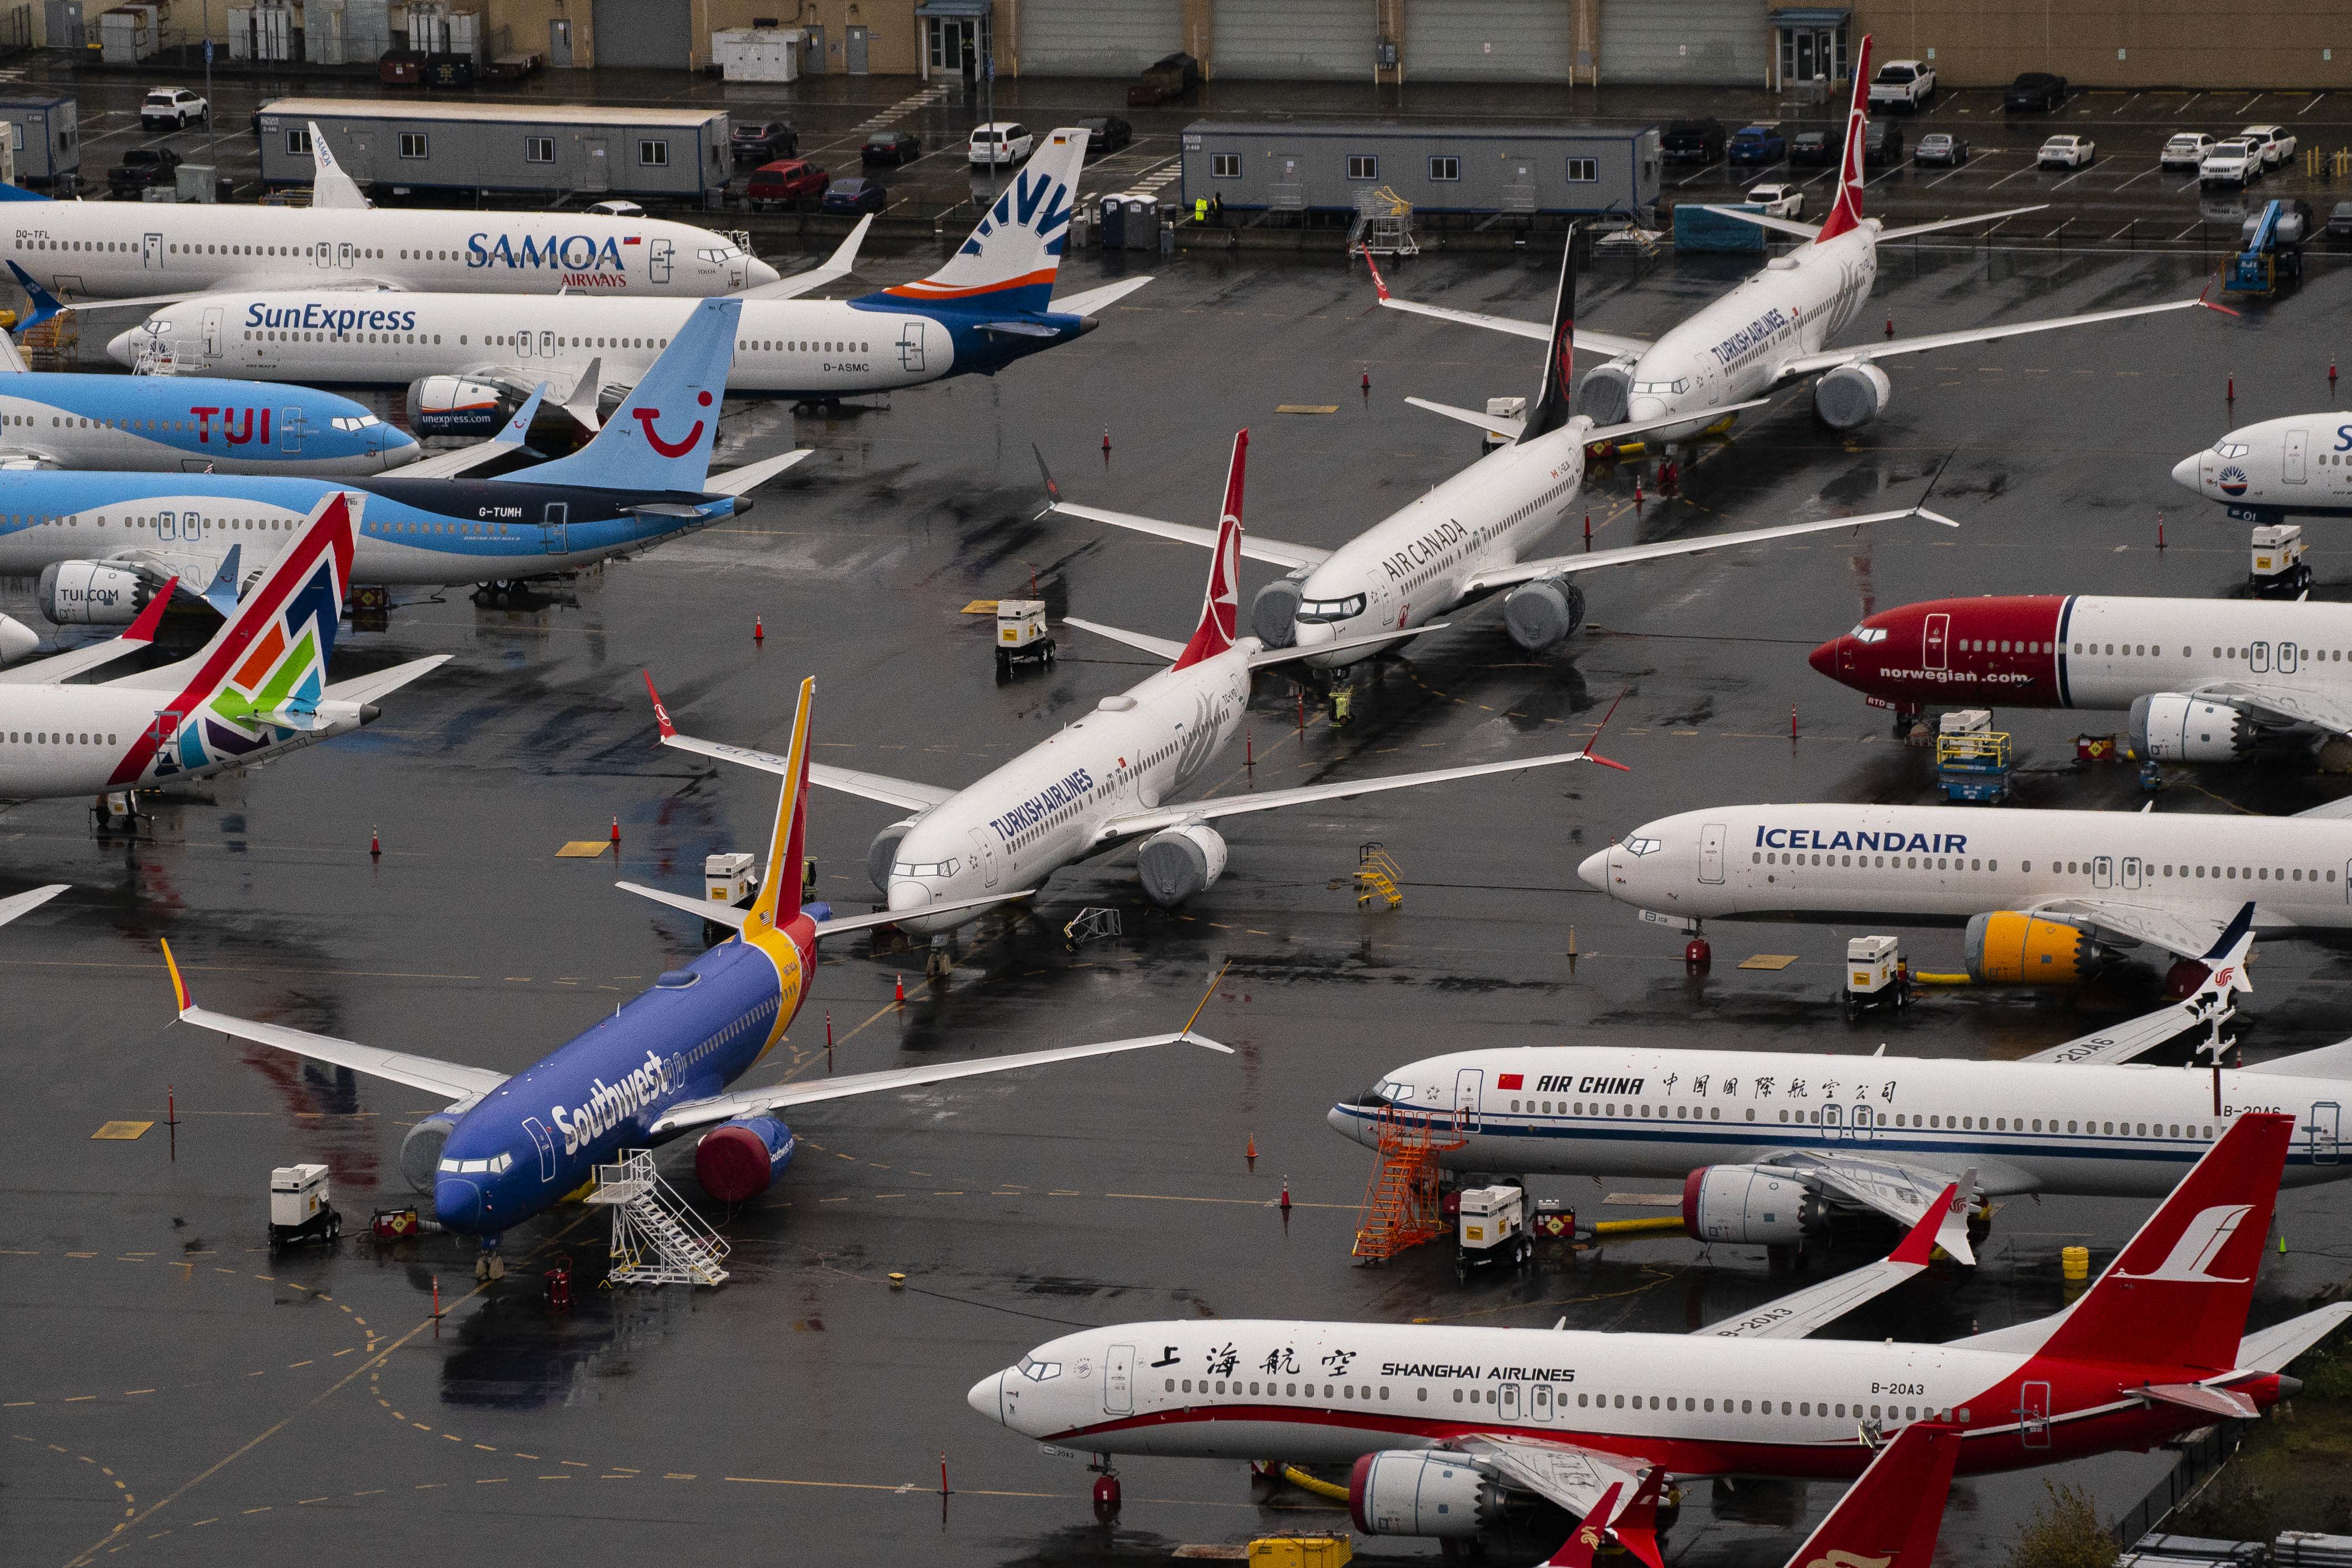 Boeing warns 737 MAX production and deliveries will drop due to parts problem